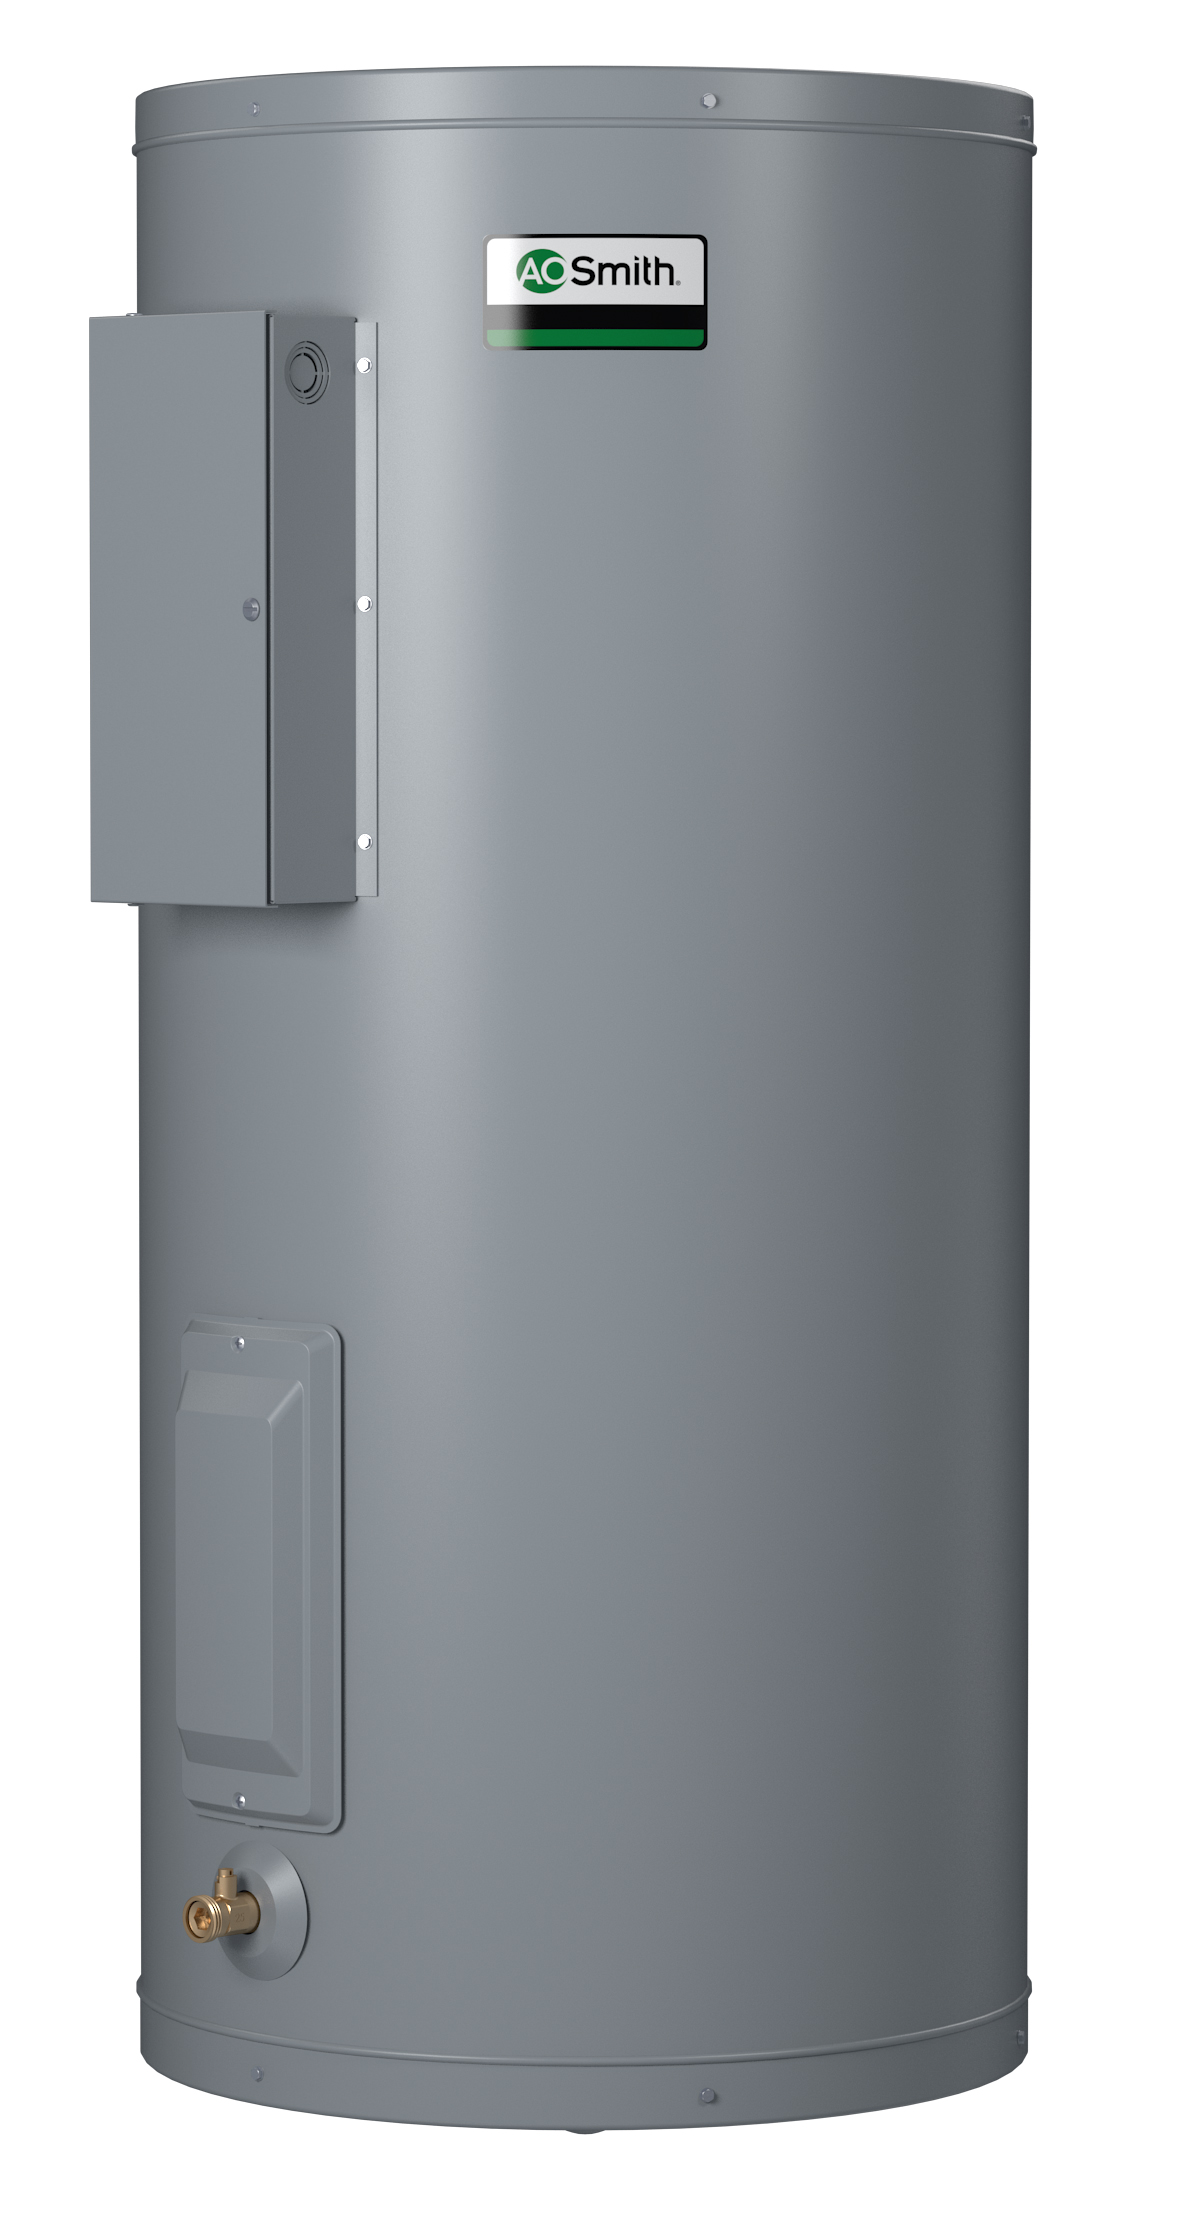 AO SMITH DEN-120D: 120 GALLONS, 10.0KW, 240 VOLT, 3 PHASE, (2-5000 WATT ELEMENTS, SIMULTANEOUS WIRING), DURA-POWER, LIGHT DUTY COMMERCIAL ELECTRIC WATER HEATER